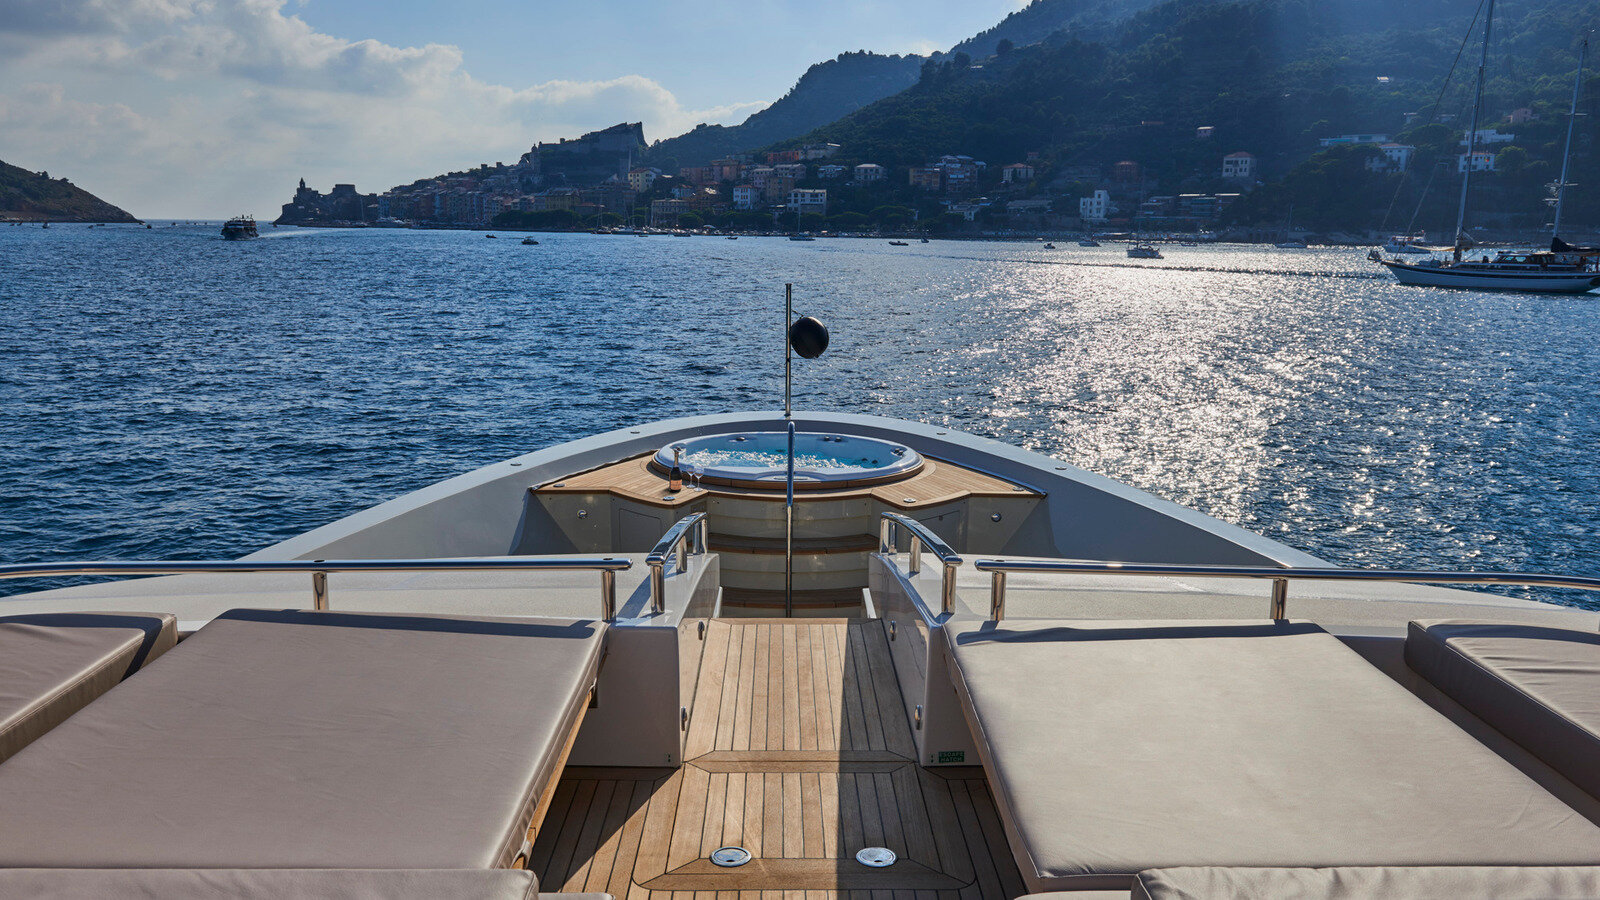 Foredeck with Jacuzzi